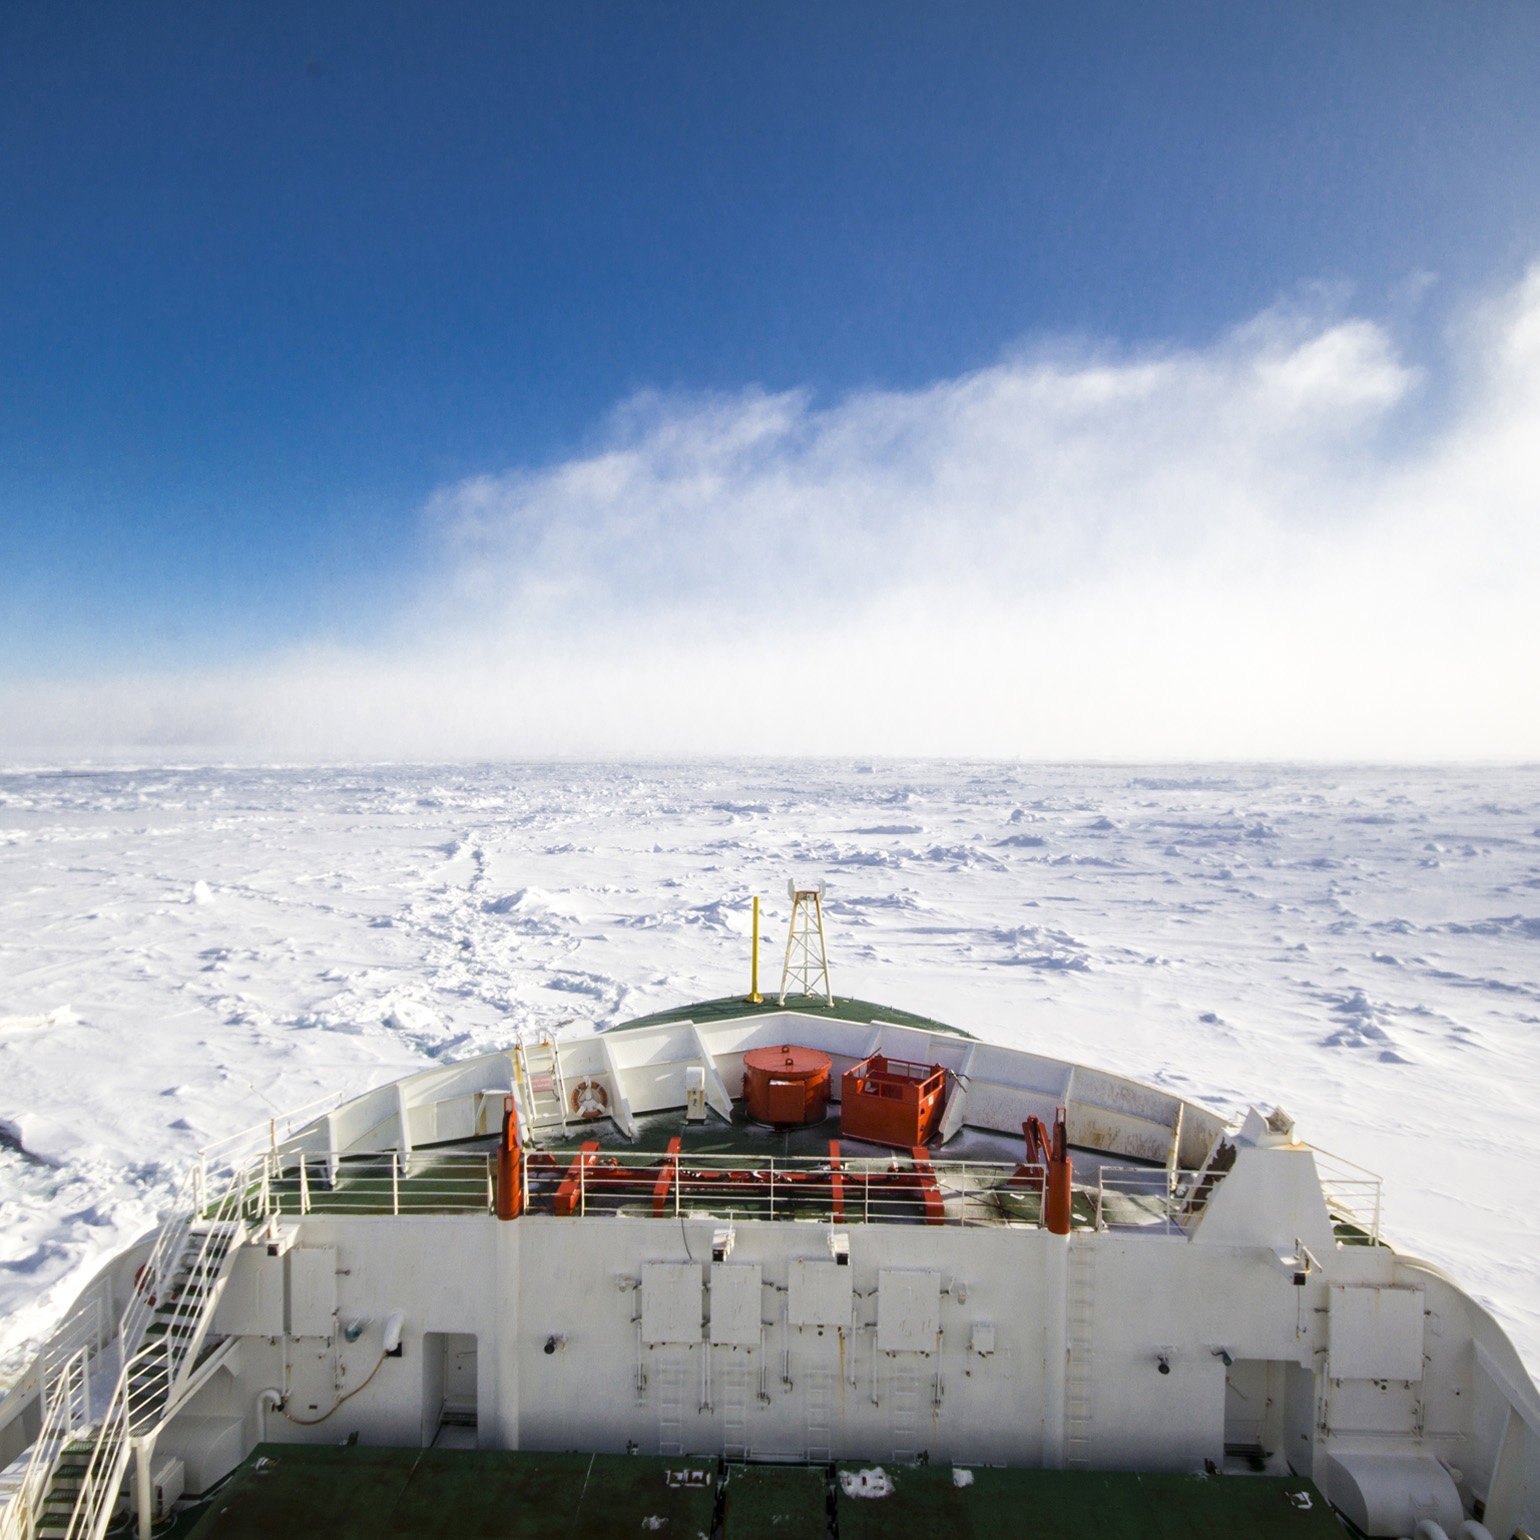 The front of an icebreaker ship, moving through pack ice in Antarctica